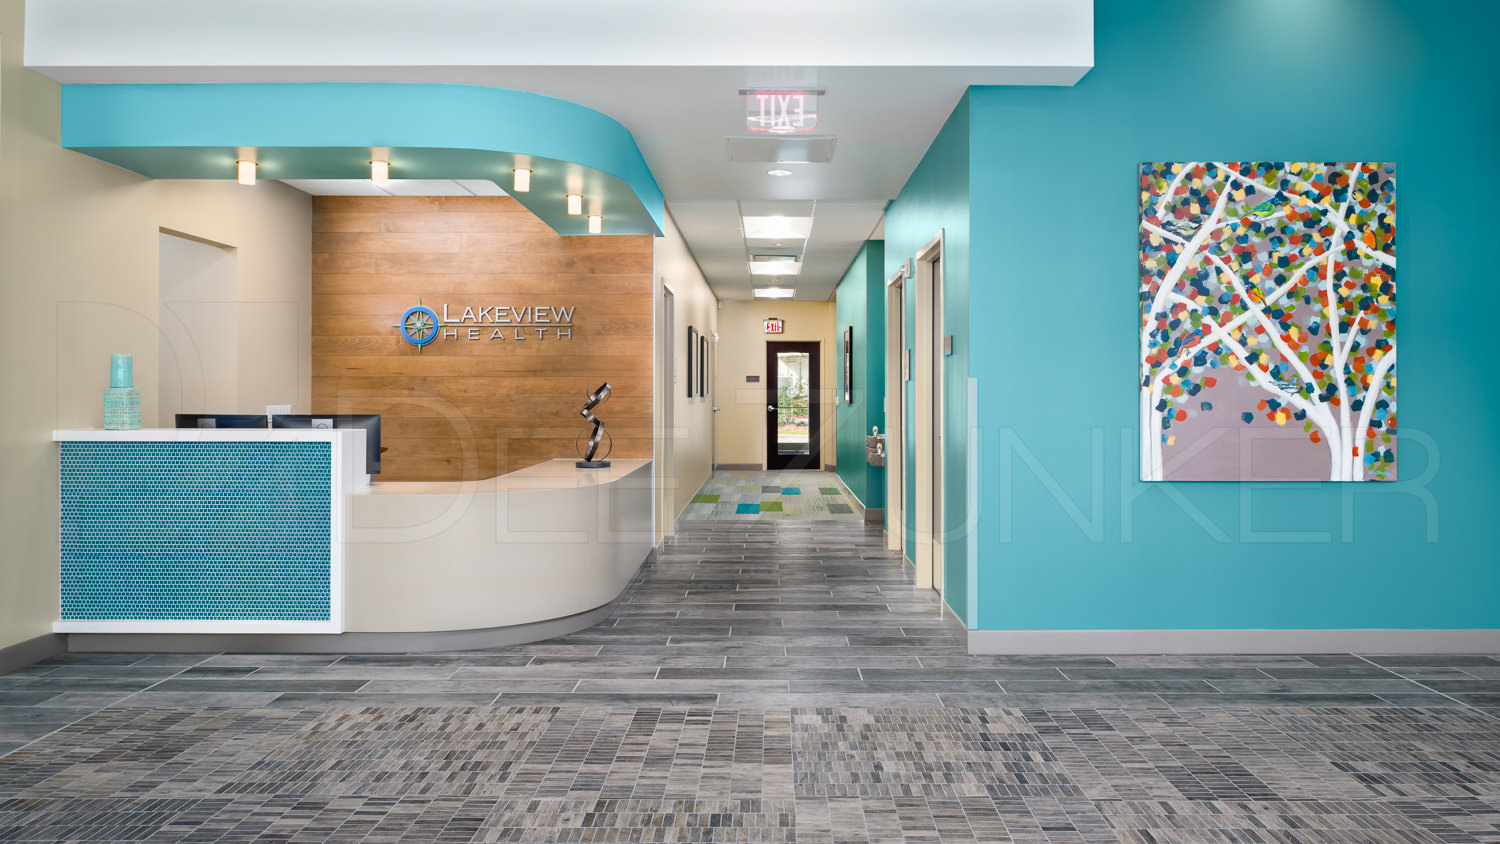 Entrance - Lakeview Health - Woodlands TX  Lakeview-201801-001.jpg  Houston Commercial Photographer Dee Zunker